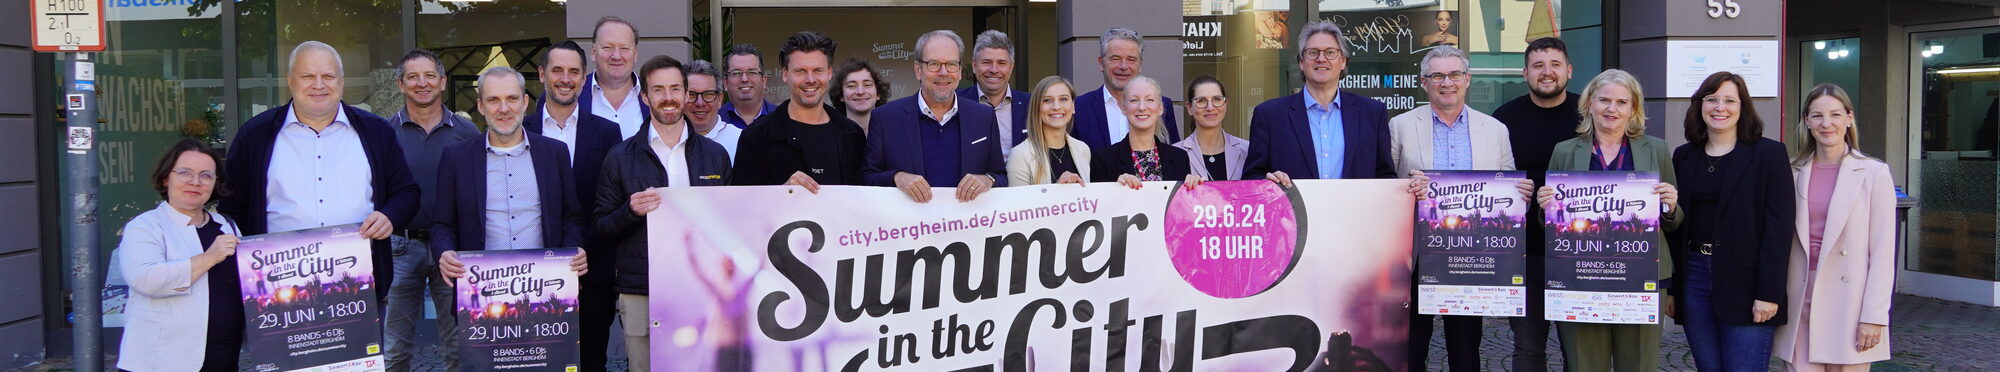 Gruppenfoto "Summer in the City"